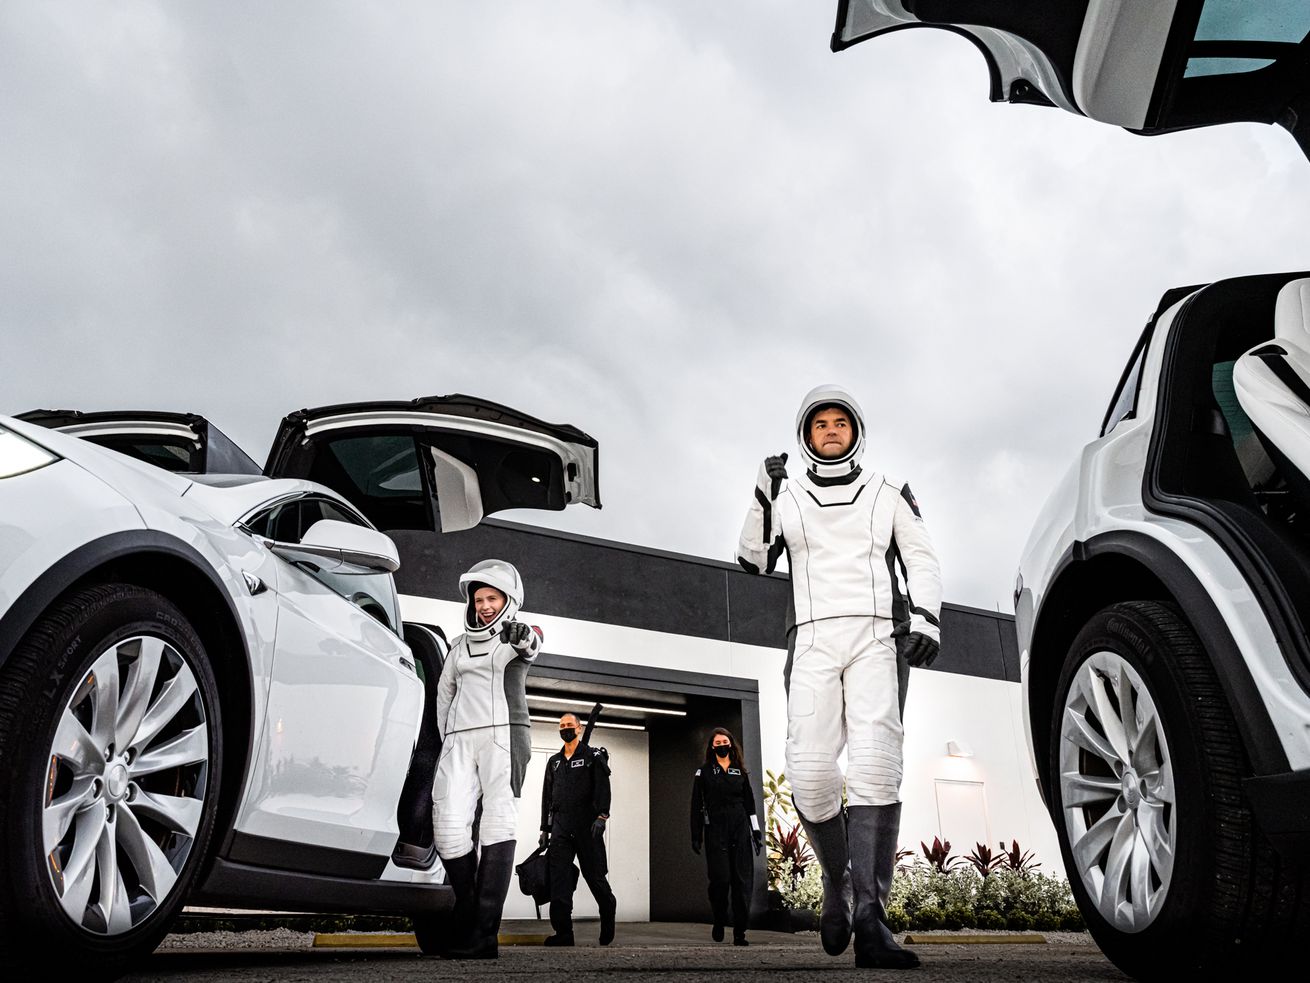 People in astronaut suits exit cars with gull-wing doors.